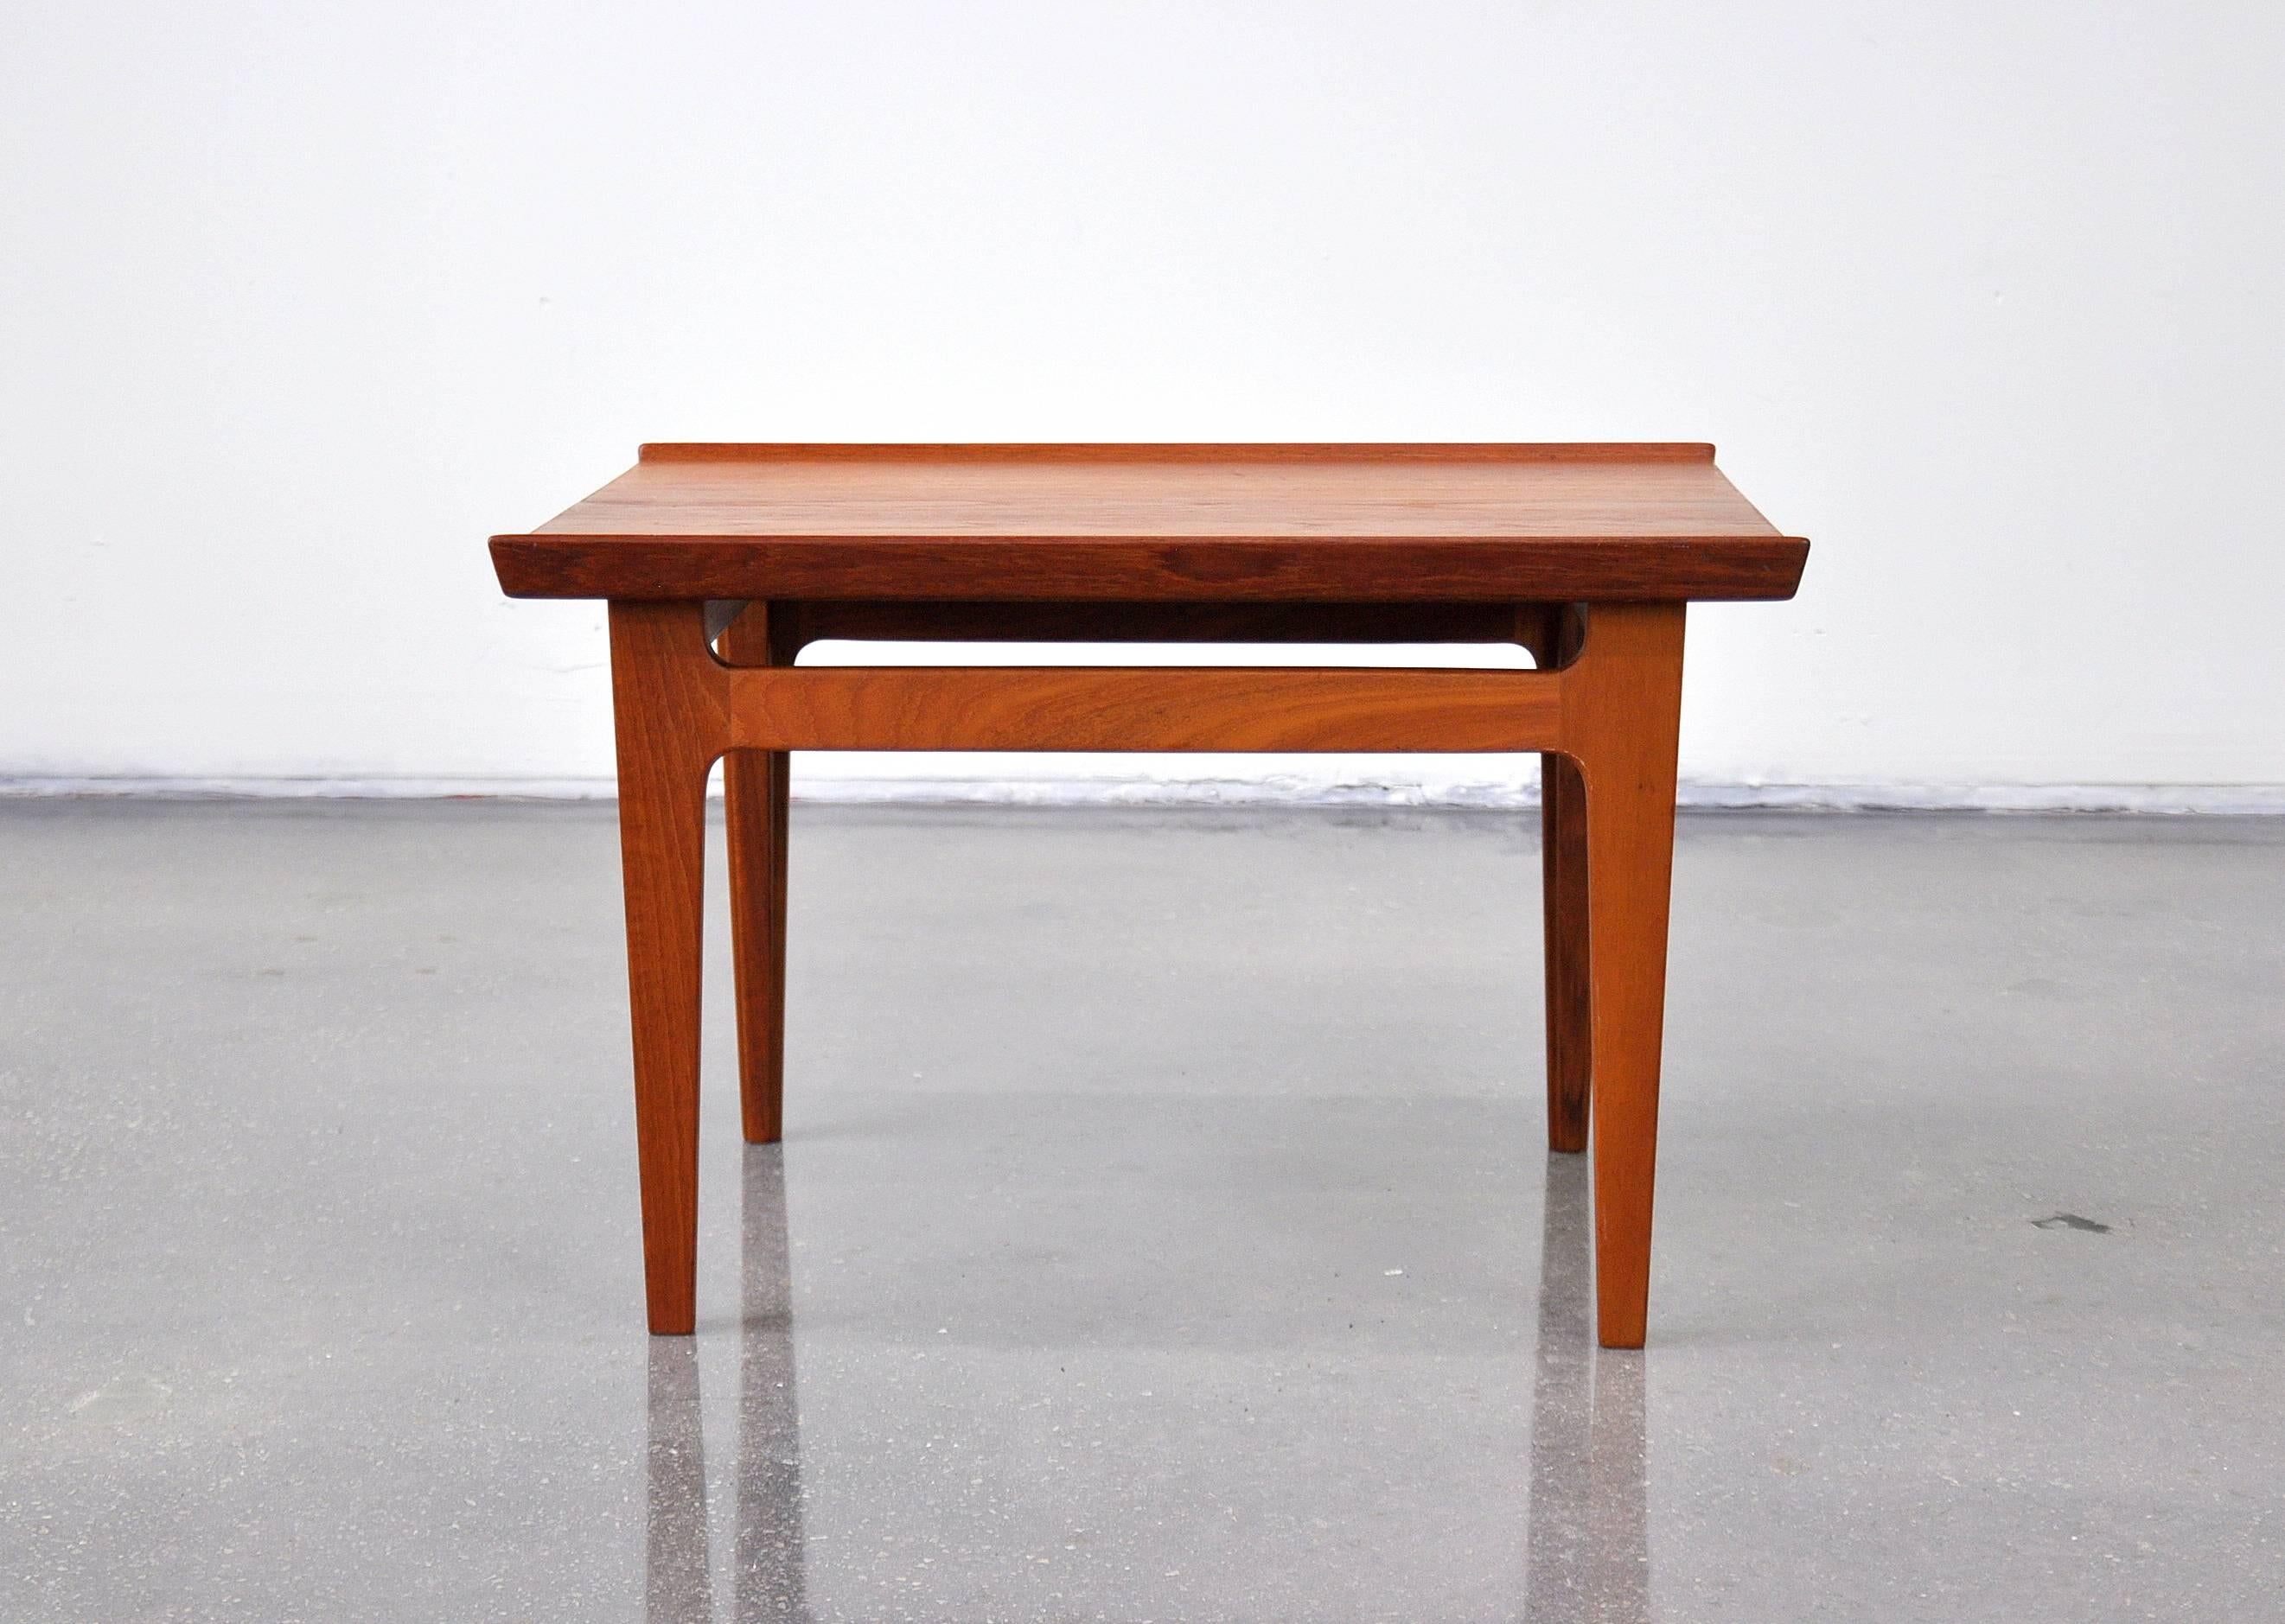 Solid teak Mid-Century Danish modern occasional table, model 535, designed by Finn Juhl for France and Daverkosen. The small end table features a raised lip and sculpted legs. In great original condition, it boasts a beautiful, warm patina. The